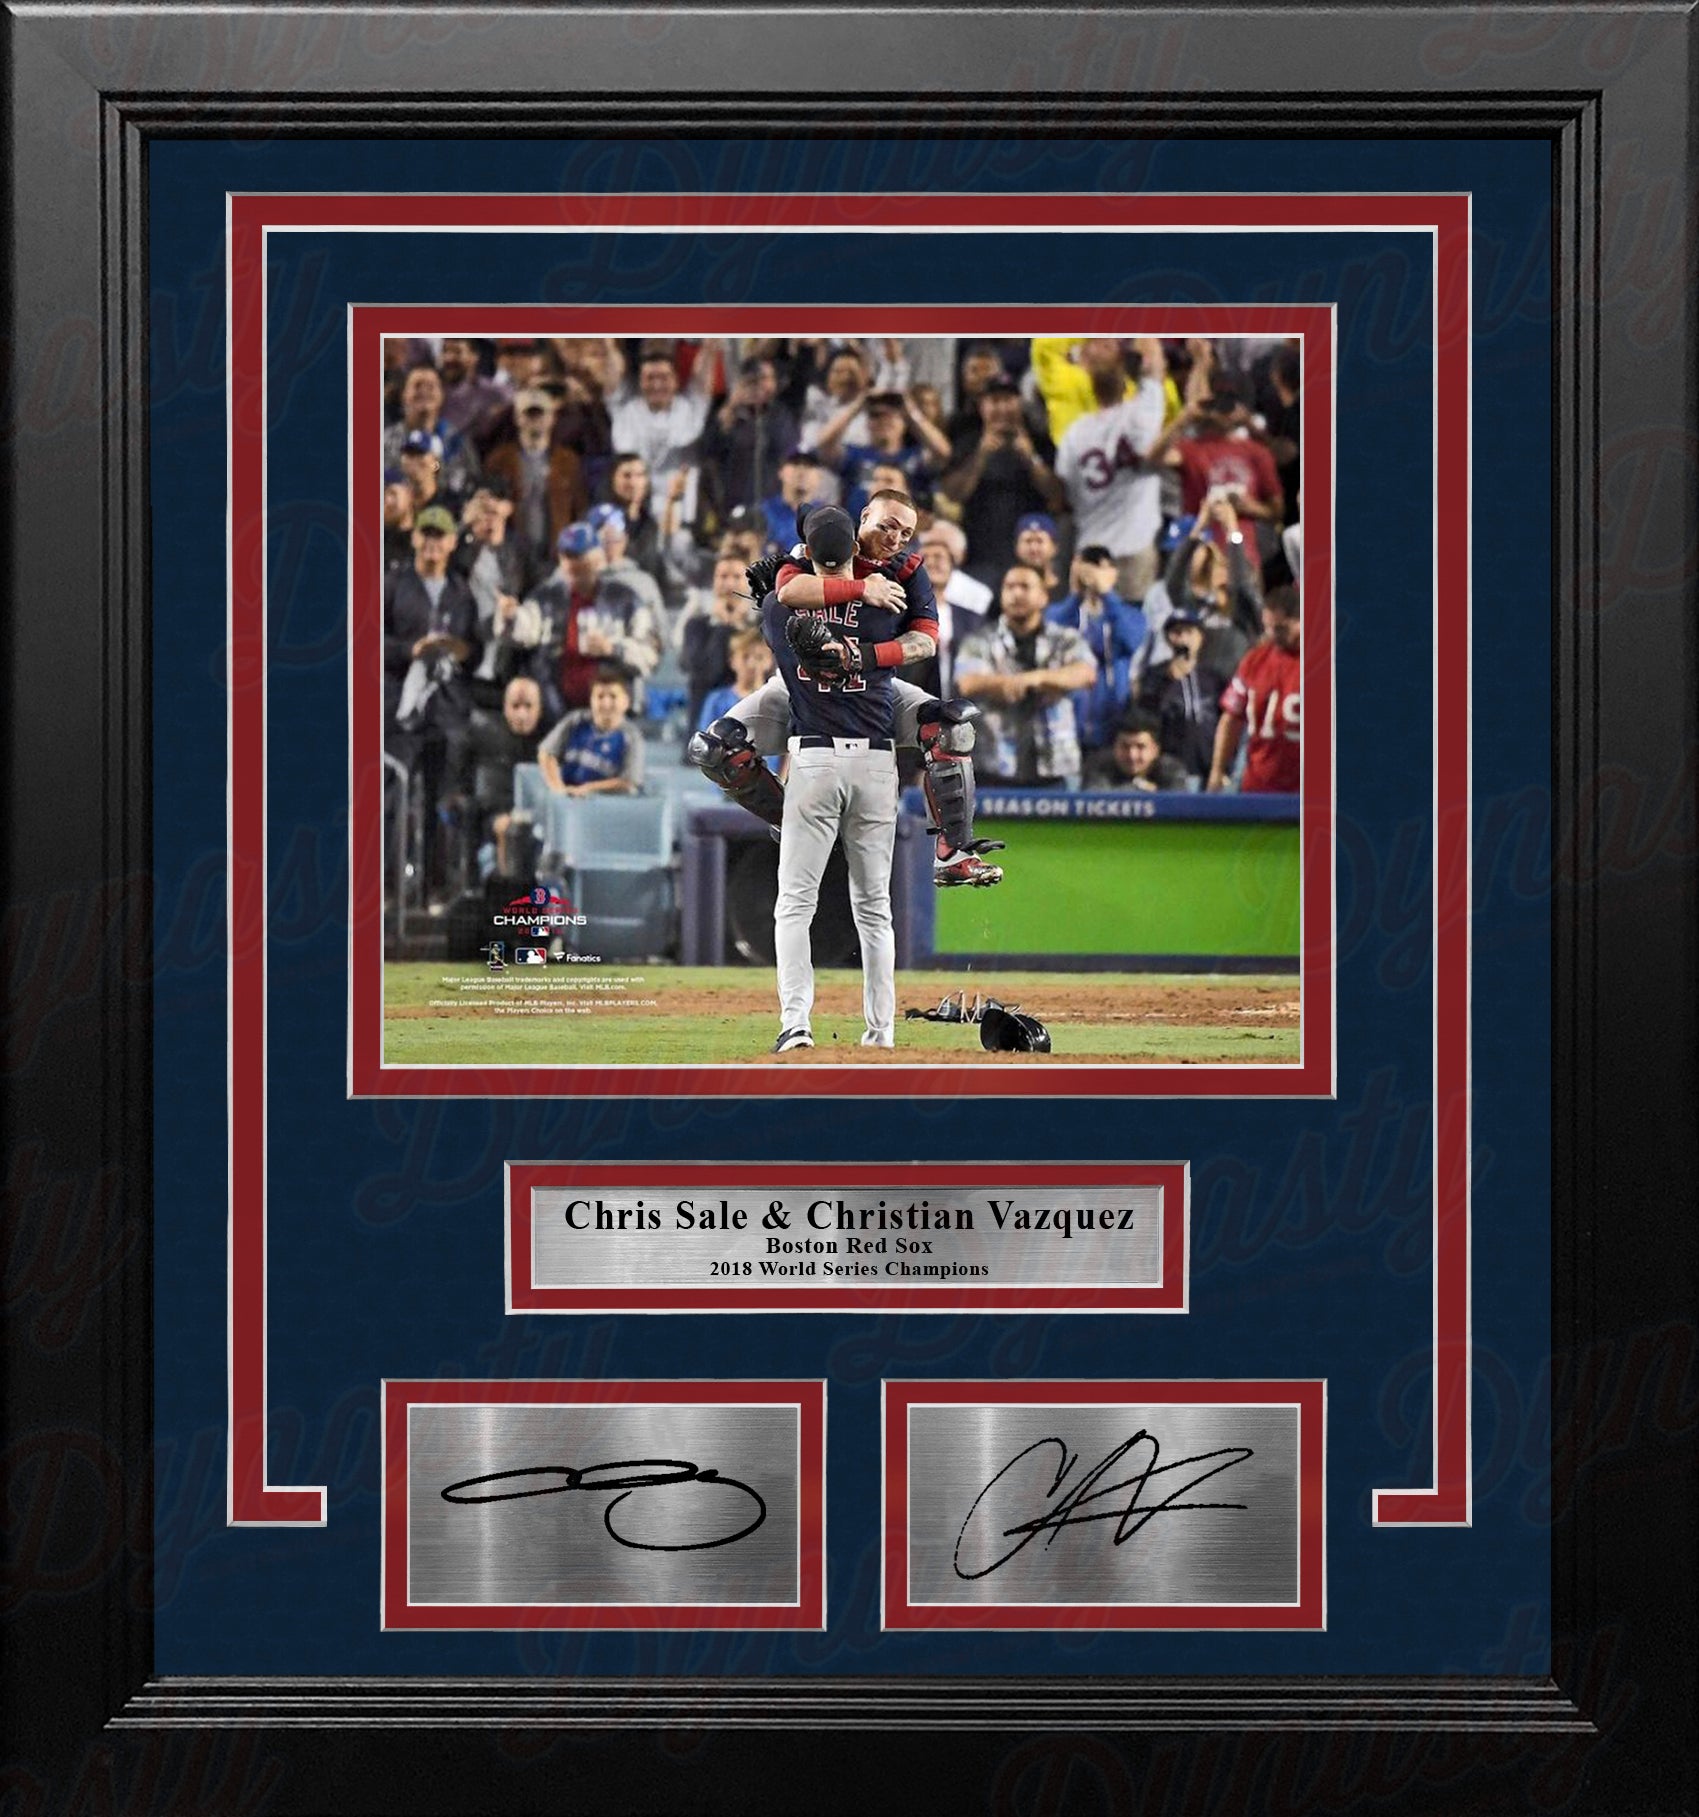 Chris Sale and Christian Vazquez Red Sox 2018 World Series 8x10 Framed Photo with Engraved Autographs